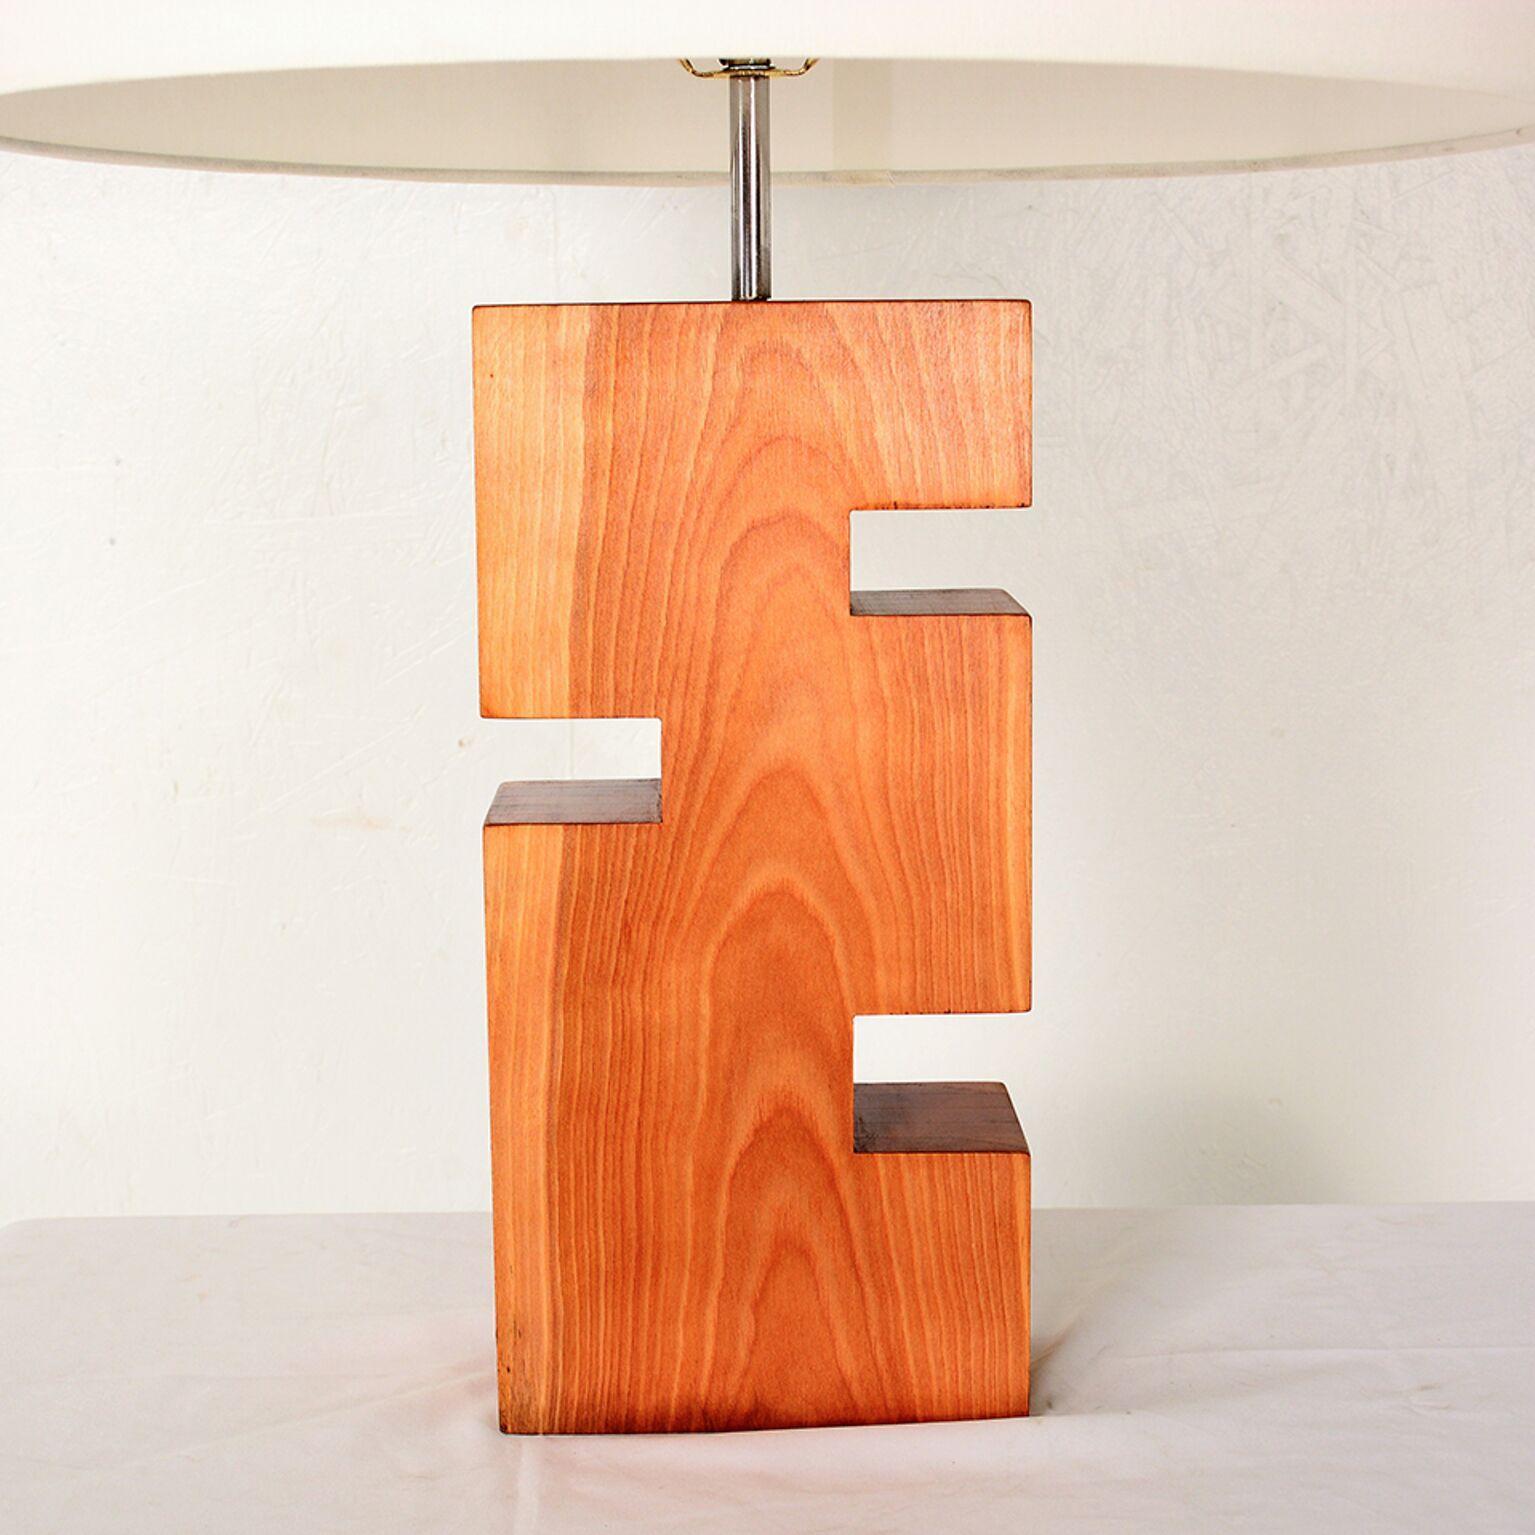 AMBIANIC offers
Vintage Uniquely Modern Wood Block Table Lamp in Geometric Carved Form
Measures: 19.75 H x 6 W x 4 D
Shade not included.
Original Unrestored Vintage condition and Presentation.
Refer to images.

